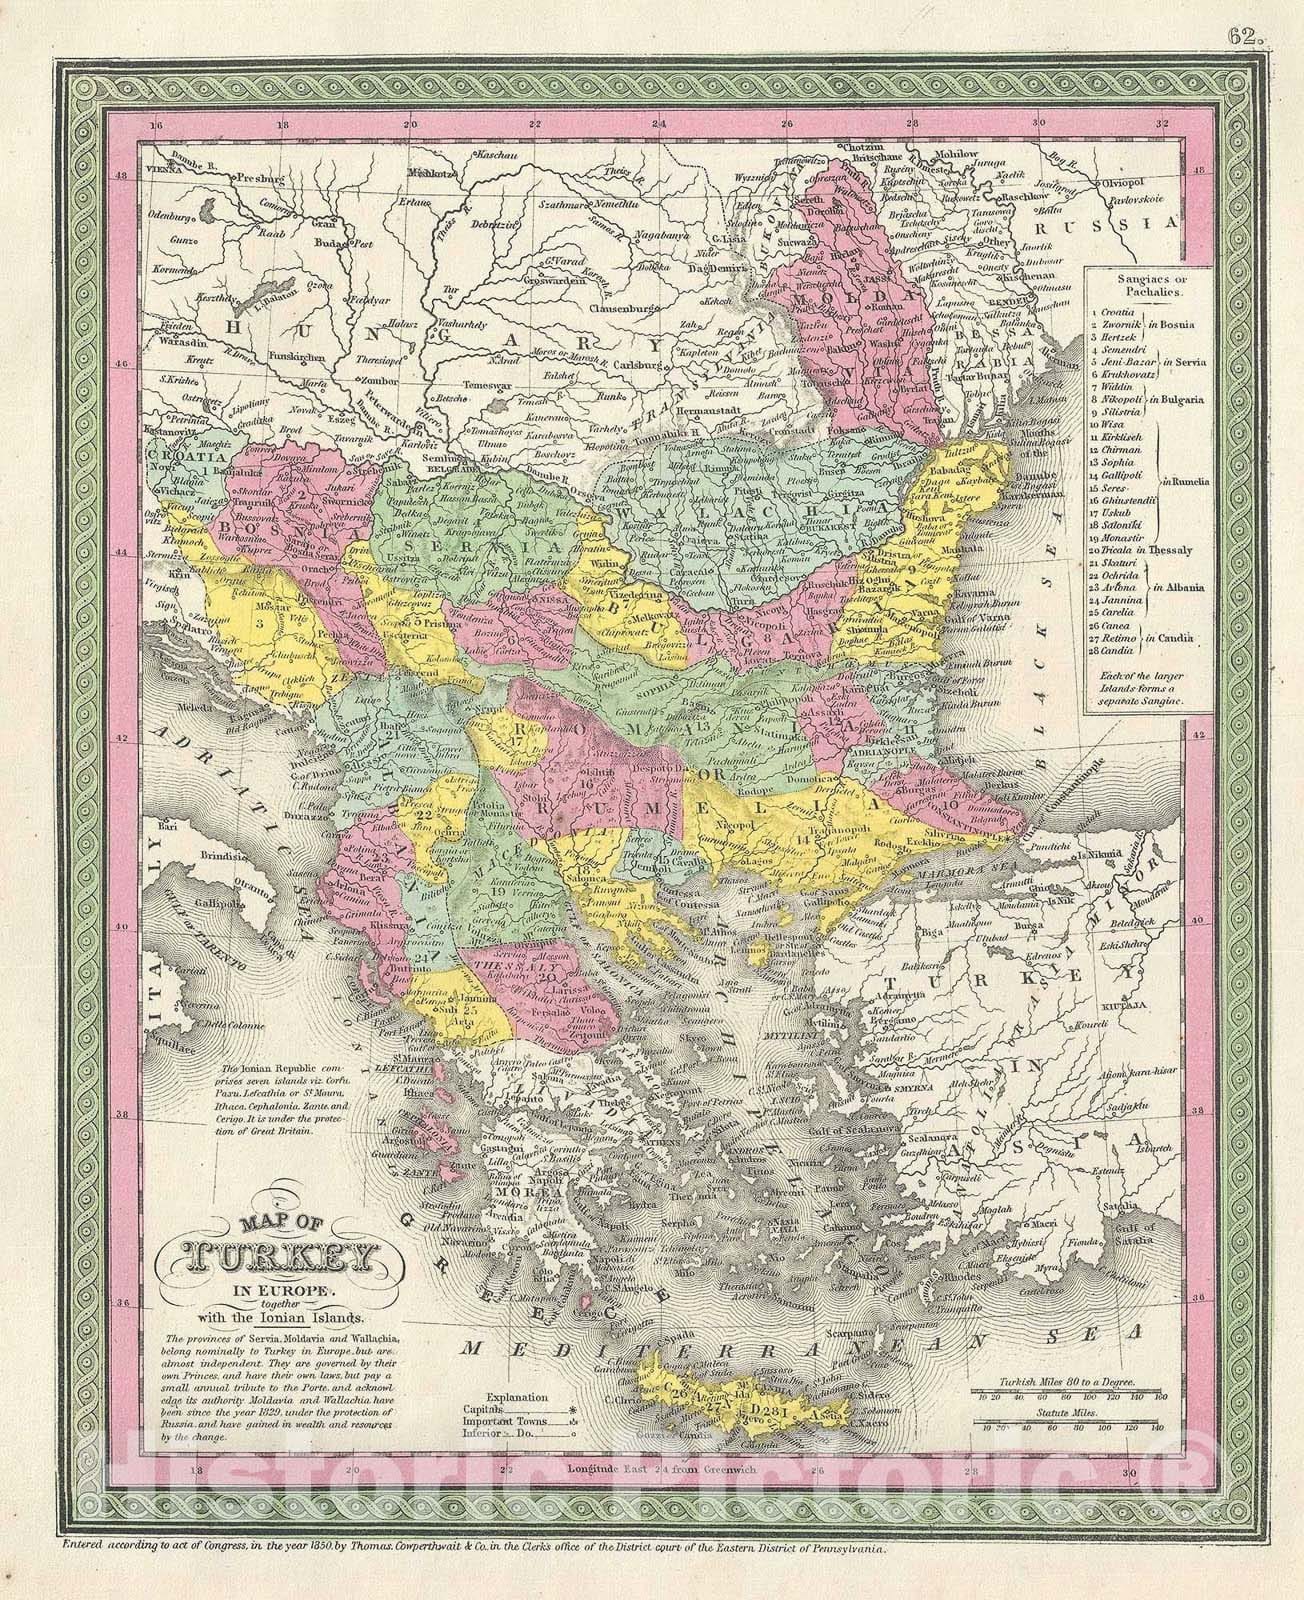 Historic Map : Greece and The Balkans, Mitchell, 1854, Vintage Wall Art